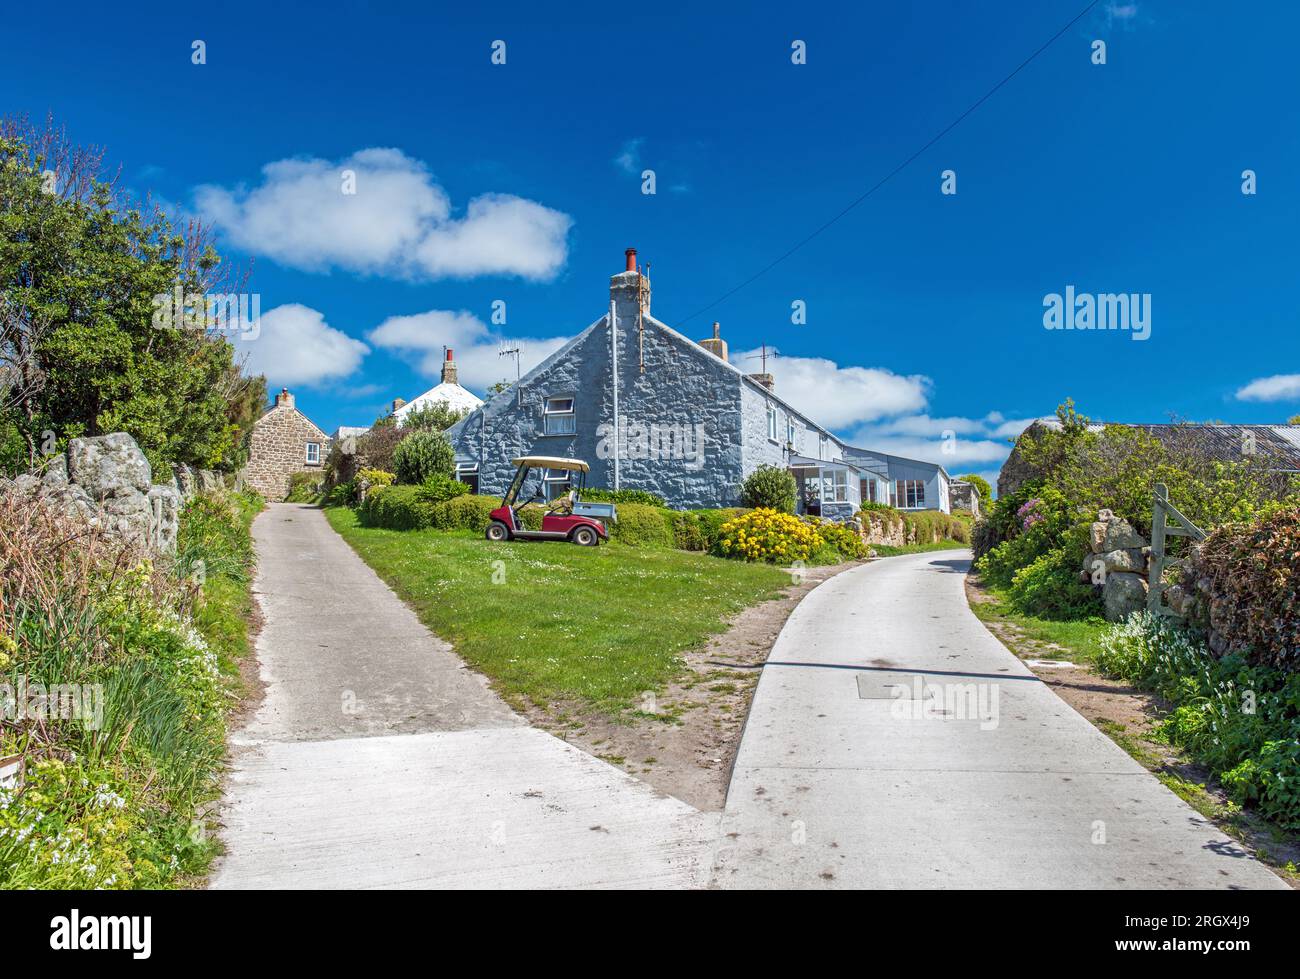 St Agnes Island  - part of the Isles of Scilly. This photo shows not only the deep blue sky but also the dividing of the roads to make life easier. Stock Photo